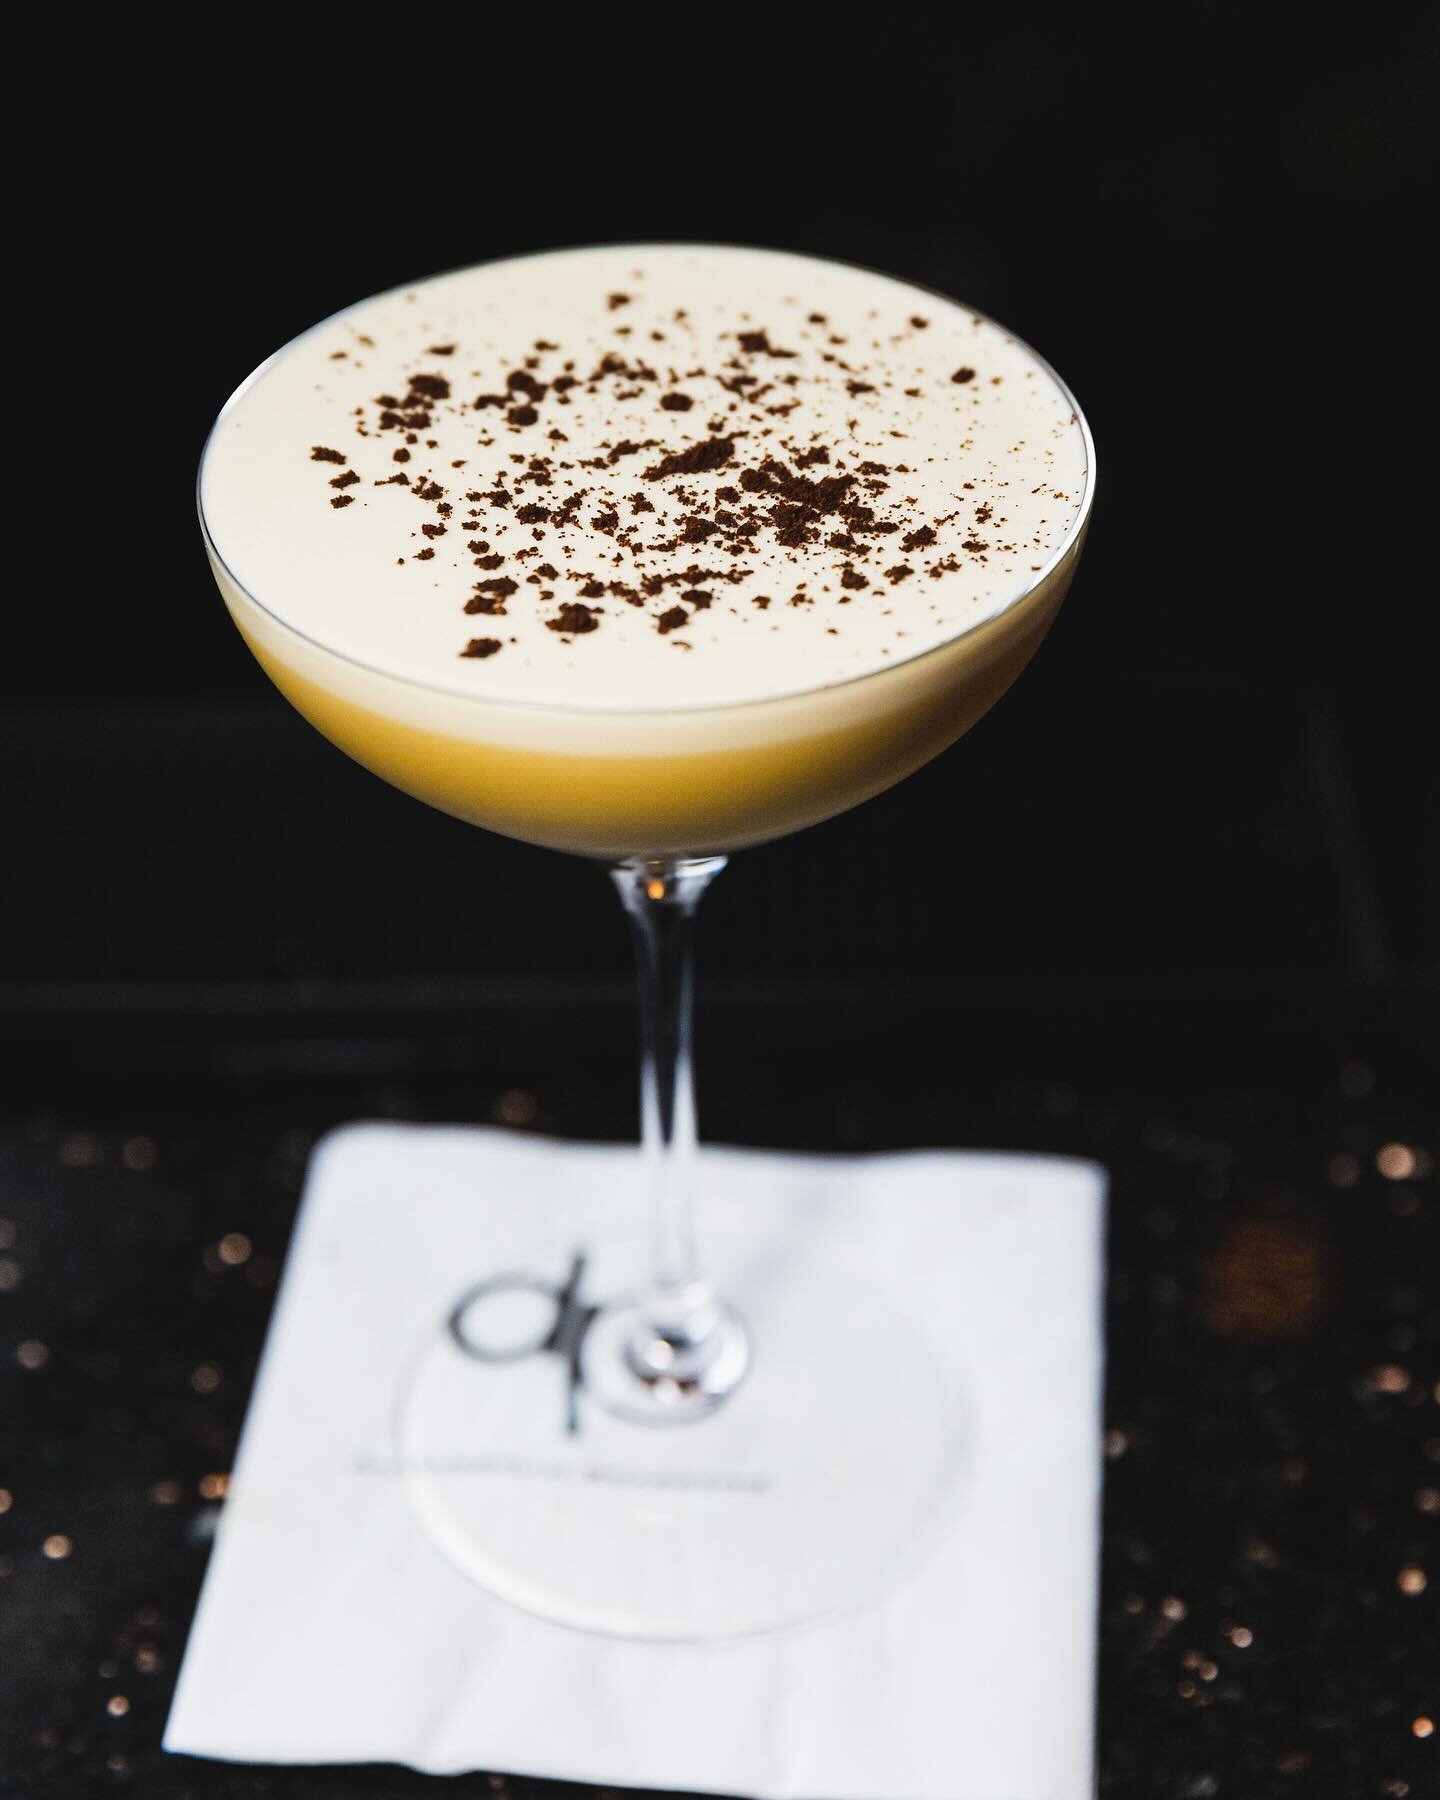 National espresso martini day? Say less.  Bar opens at 5.